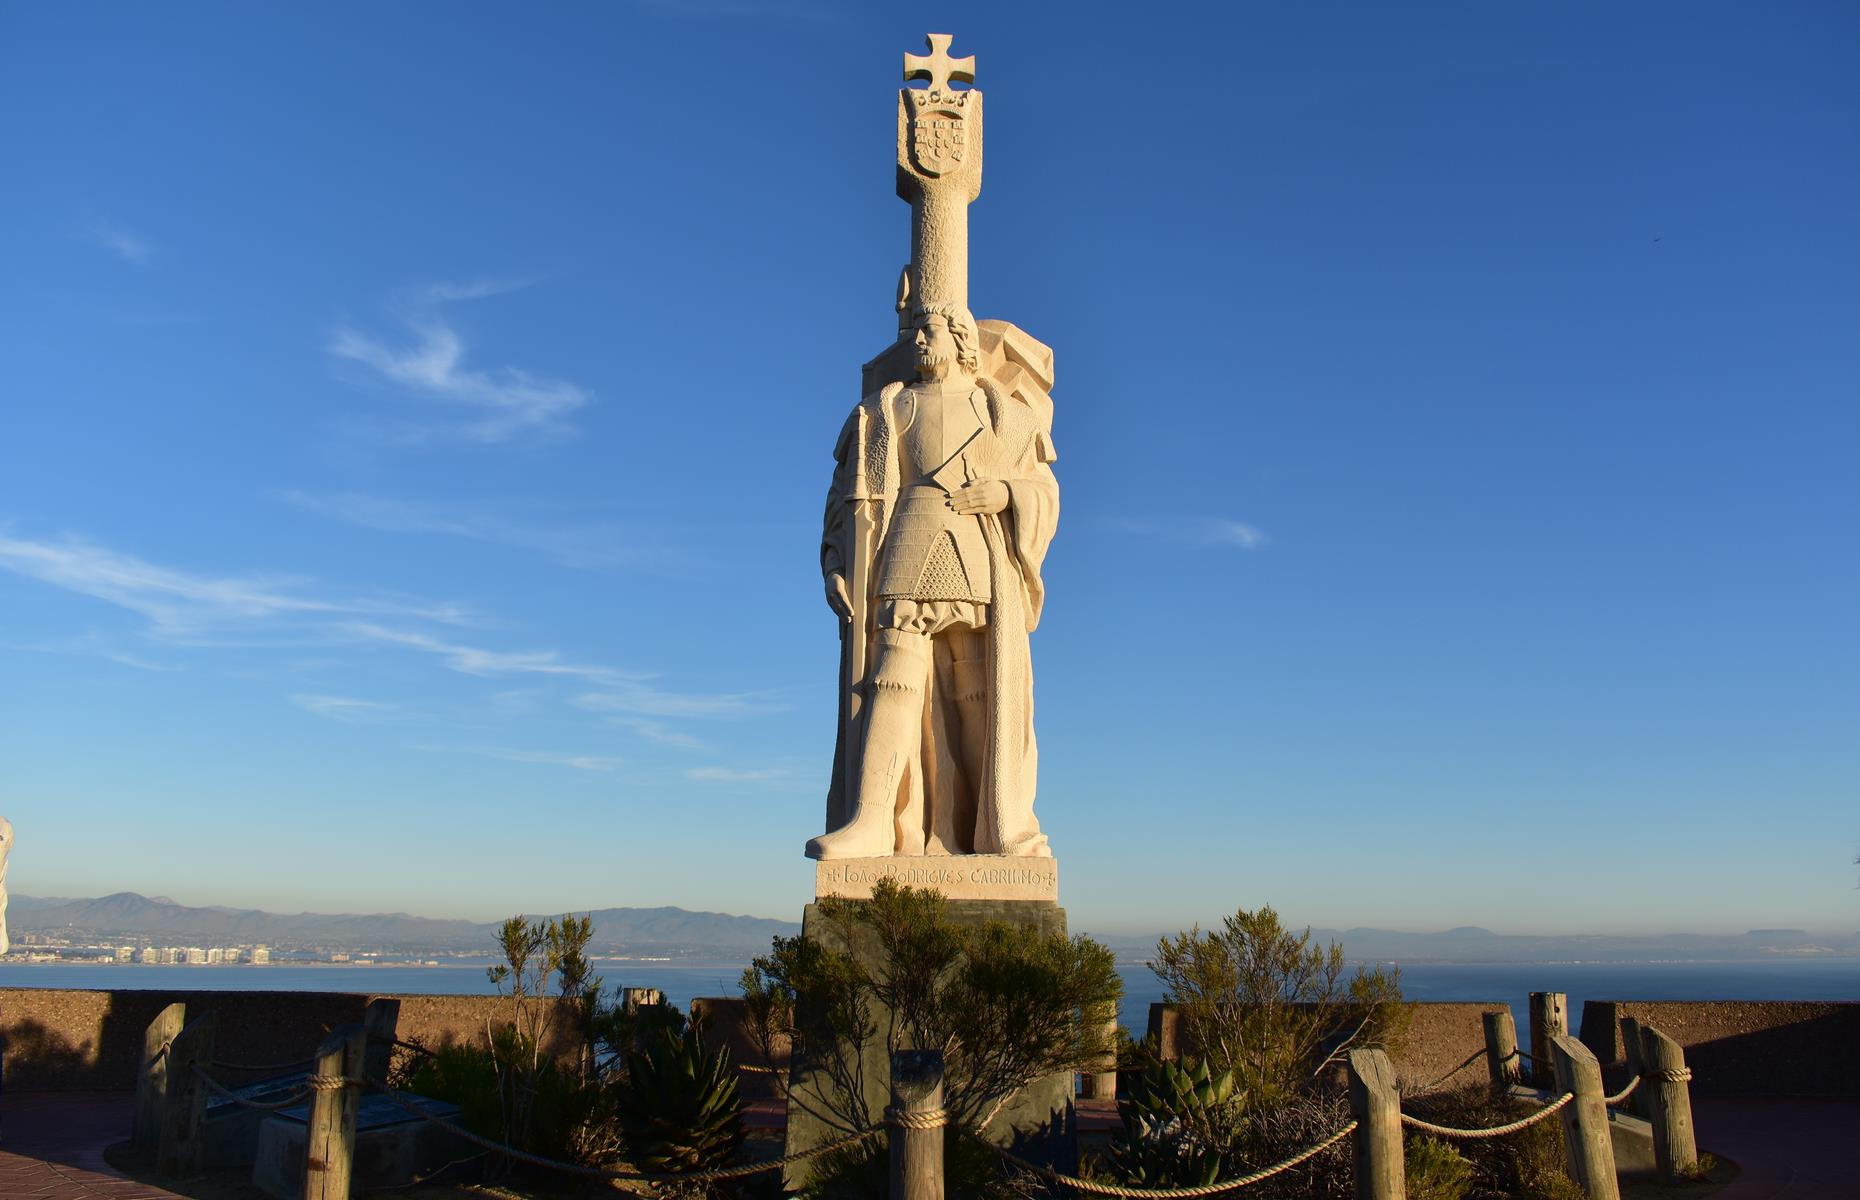 <p>Spanish-born explorer Juan Rodriguez Cabrillo is famed as the first European to set foot on the USA’s West Coast – and this National Monument pays tribute to its namesake. He arrived in what is modern-day San Diego Bay in 1542 and the Monument spreads out close to the area on Point Loma where experts believed he docked. The site includes the 19th-century Old Poma Lighthouse, the two-mile Bayside Trail and a colossal sandstone statue of the man himself. It's not without controversy though – Cabrillo's legacy is also inextricably tied to the subsequent Spanish colonization. </p>